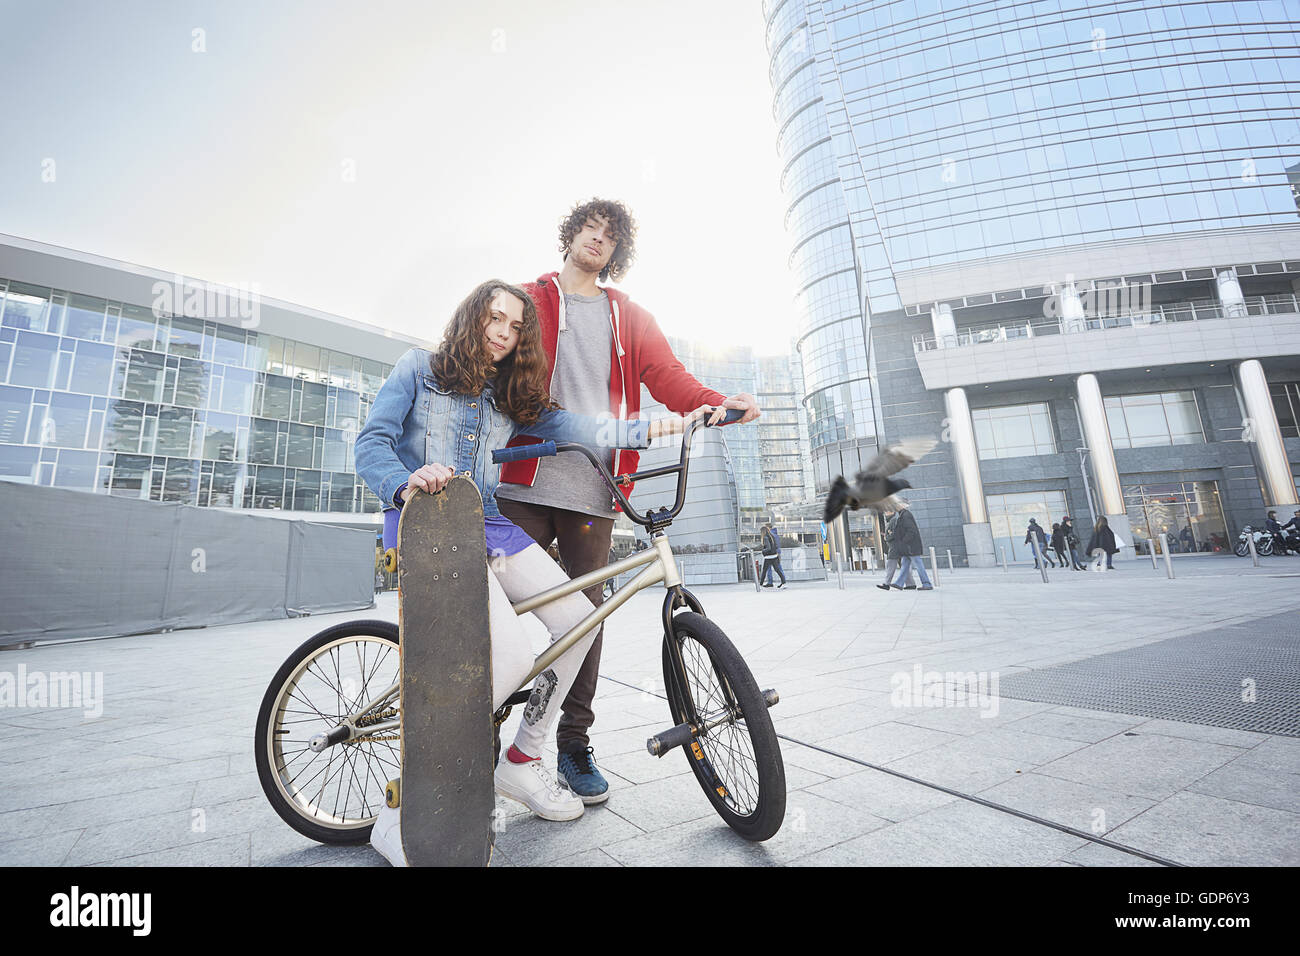 Girl and man with BMX and skateboard in urban area Stock Photo